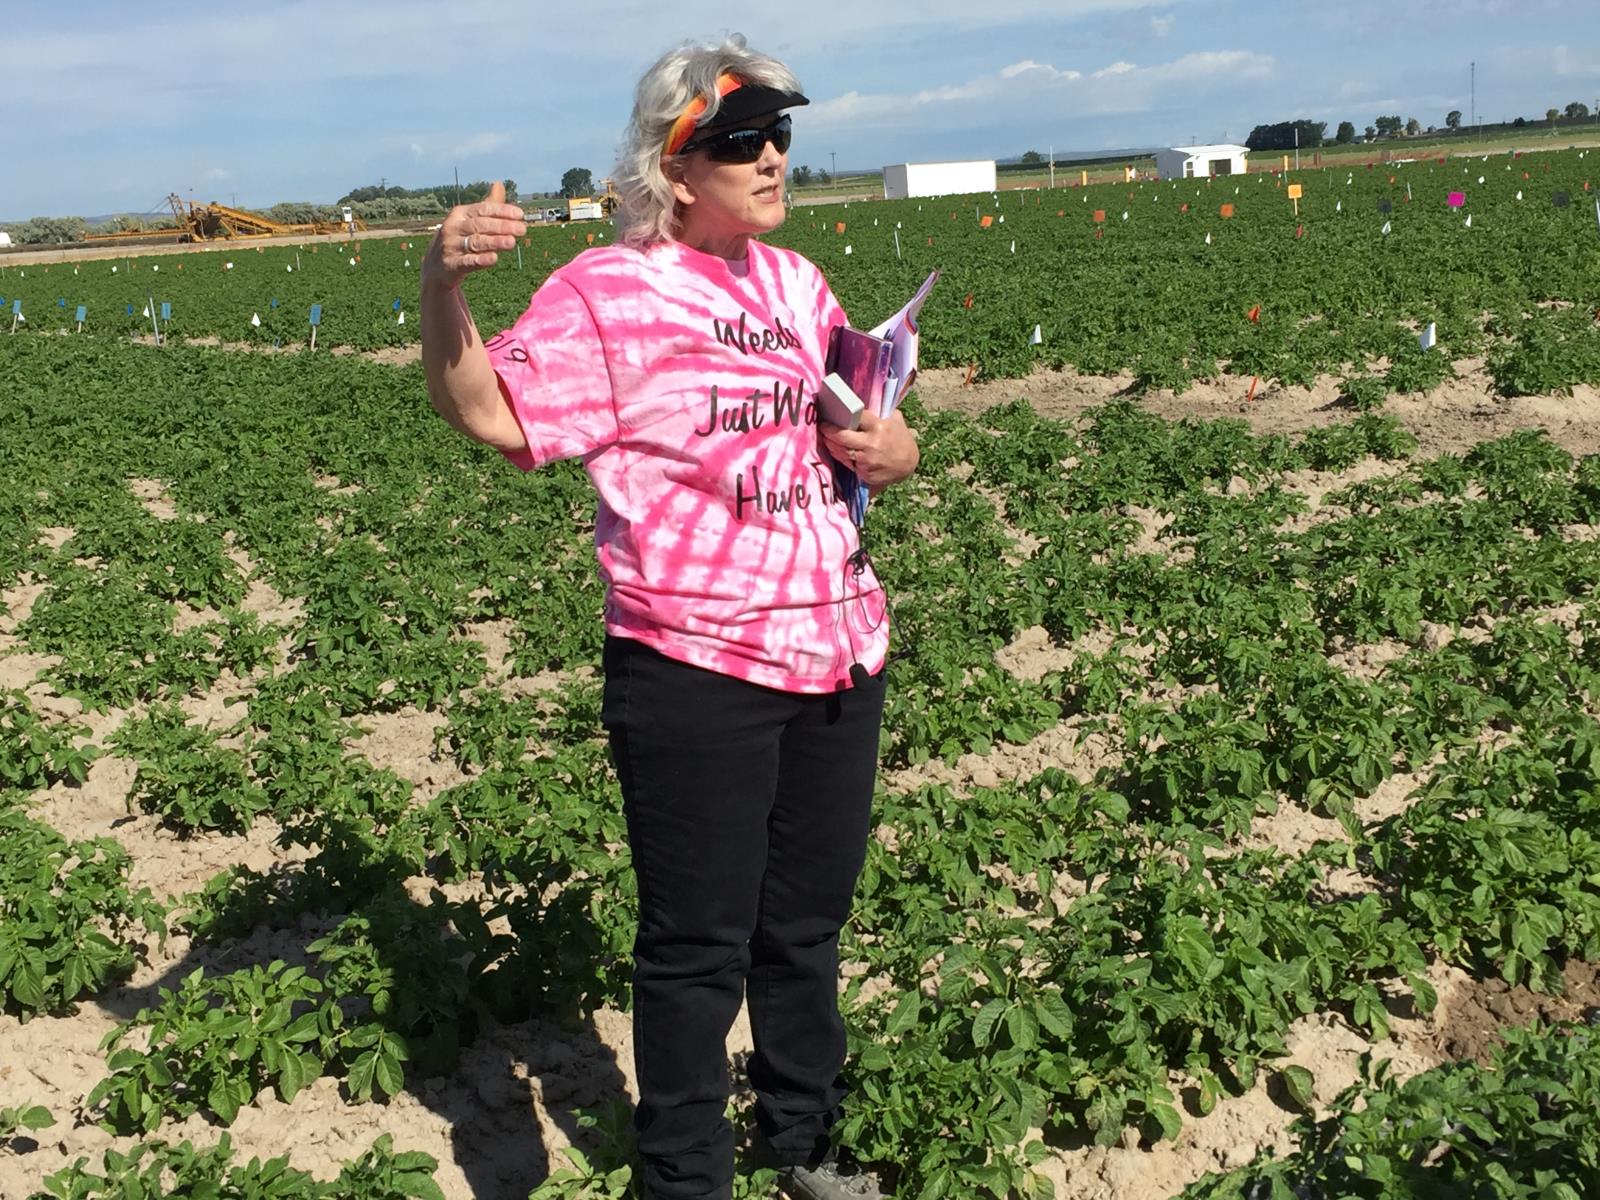 Weed scientist Pamela Hutchinson discusses her herbicide trials at the University of Idaho’s Aberdeen Research & Extension Center during the annual Snake River Weed Management Tour.